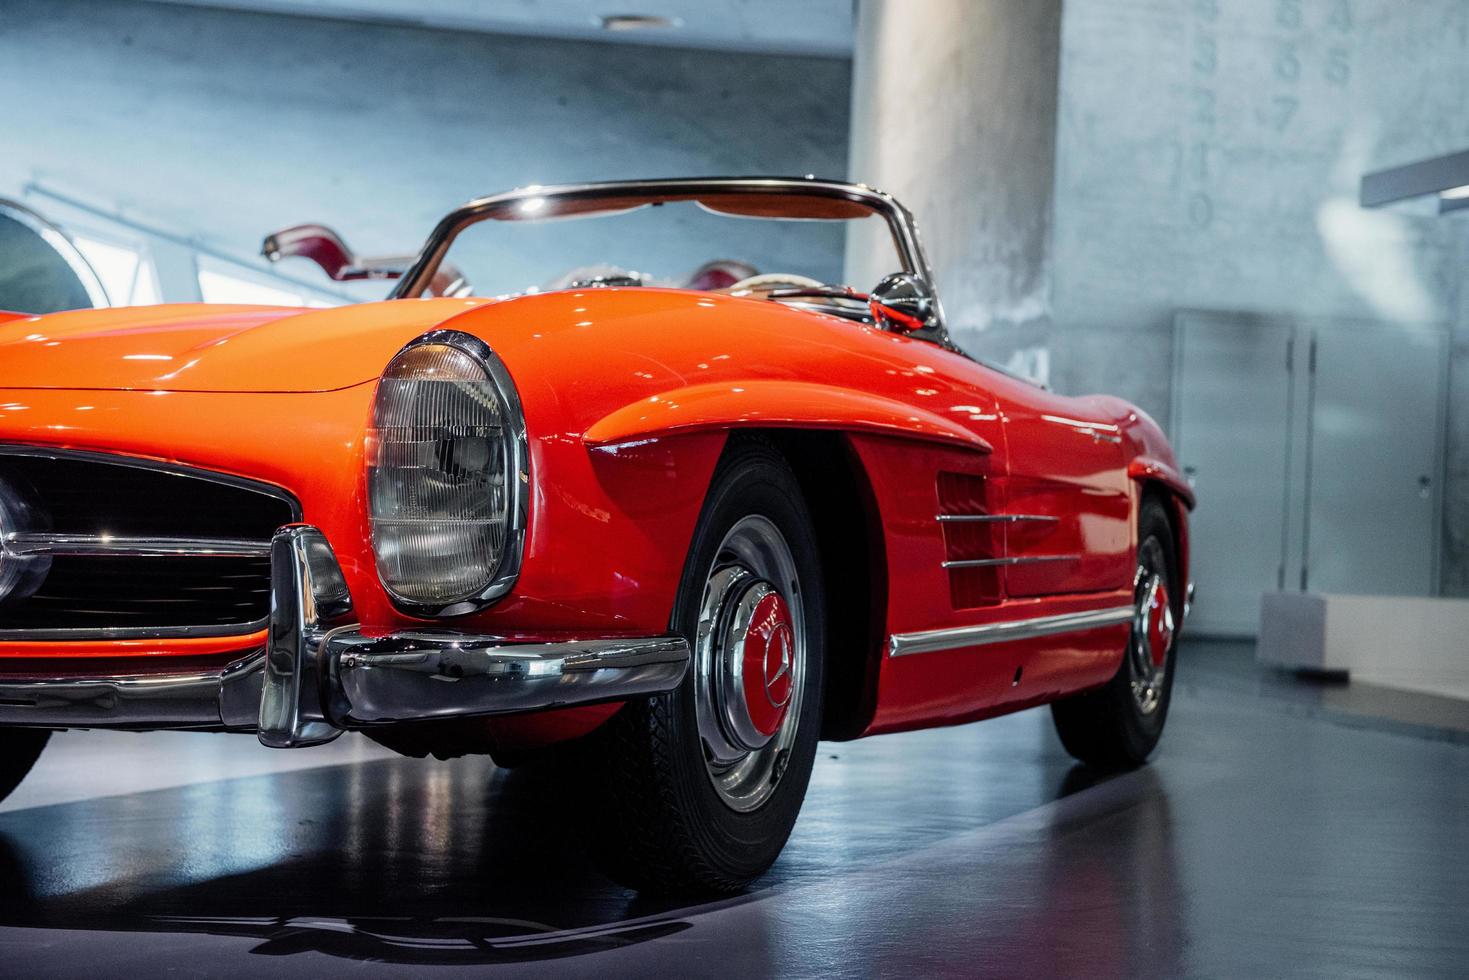 STUTTGART, GERMANY - OCTOBER 16, 2018 Mercedes Museum. Big room. Beautiful orange colored retro car captured from the front photo